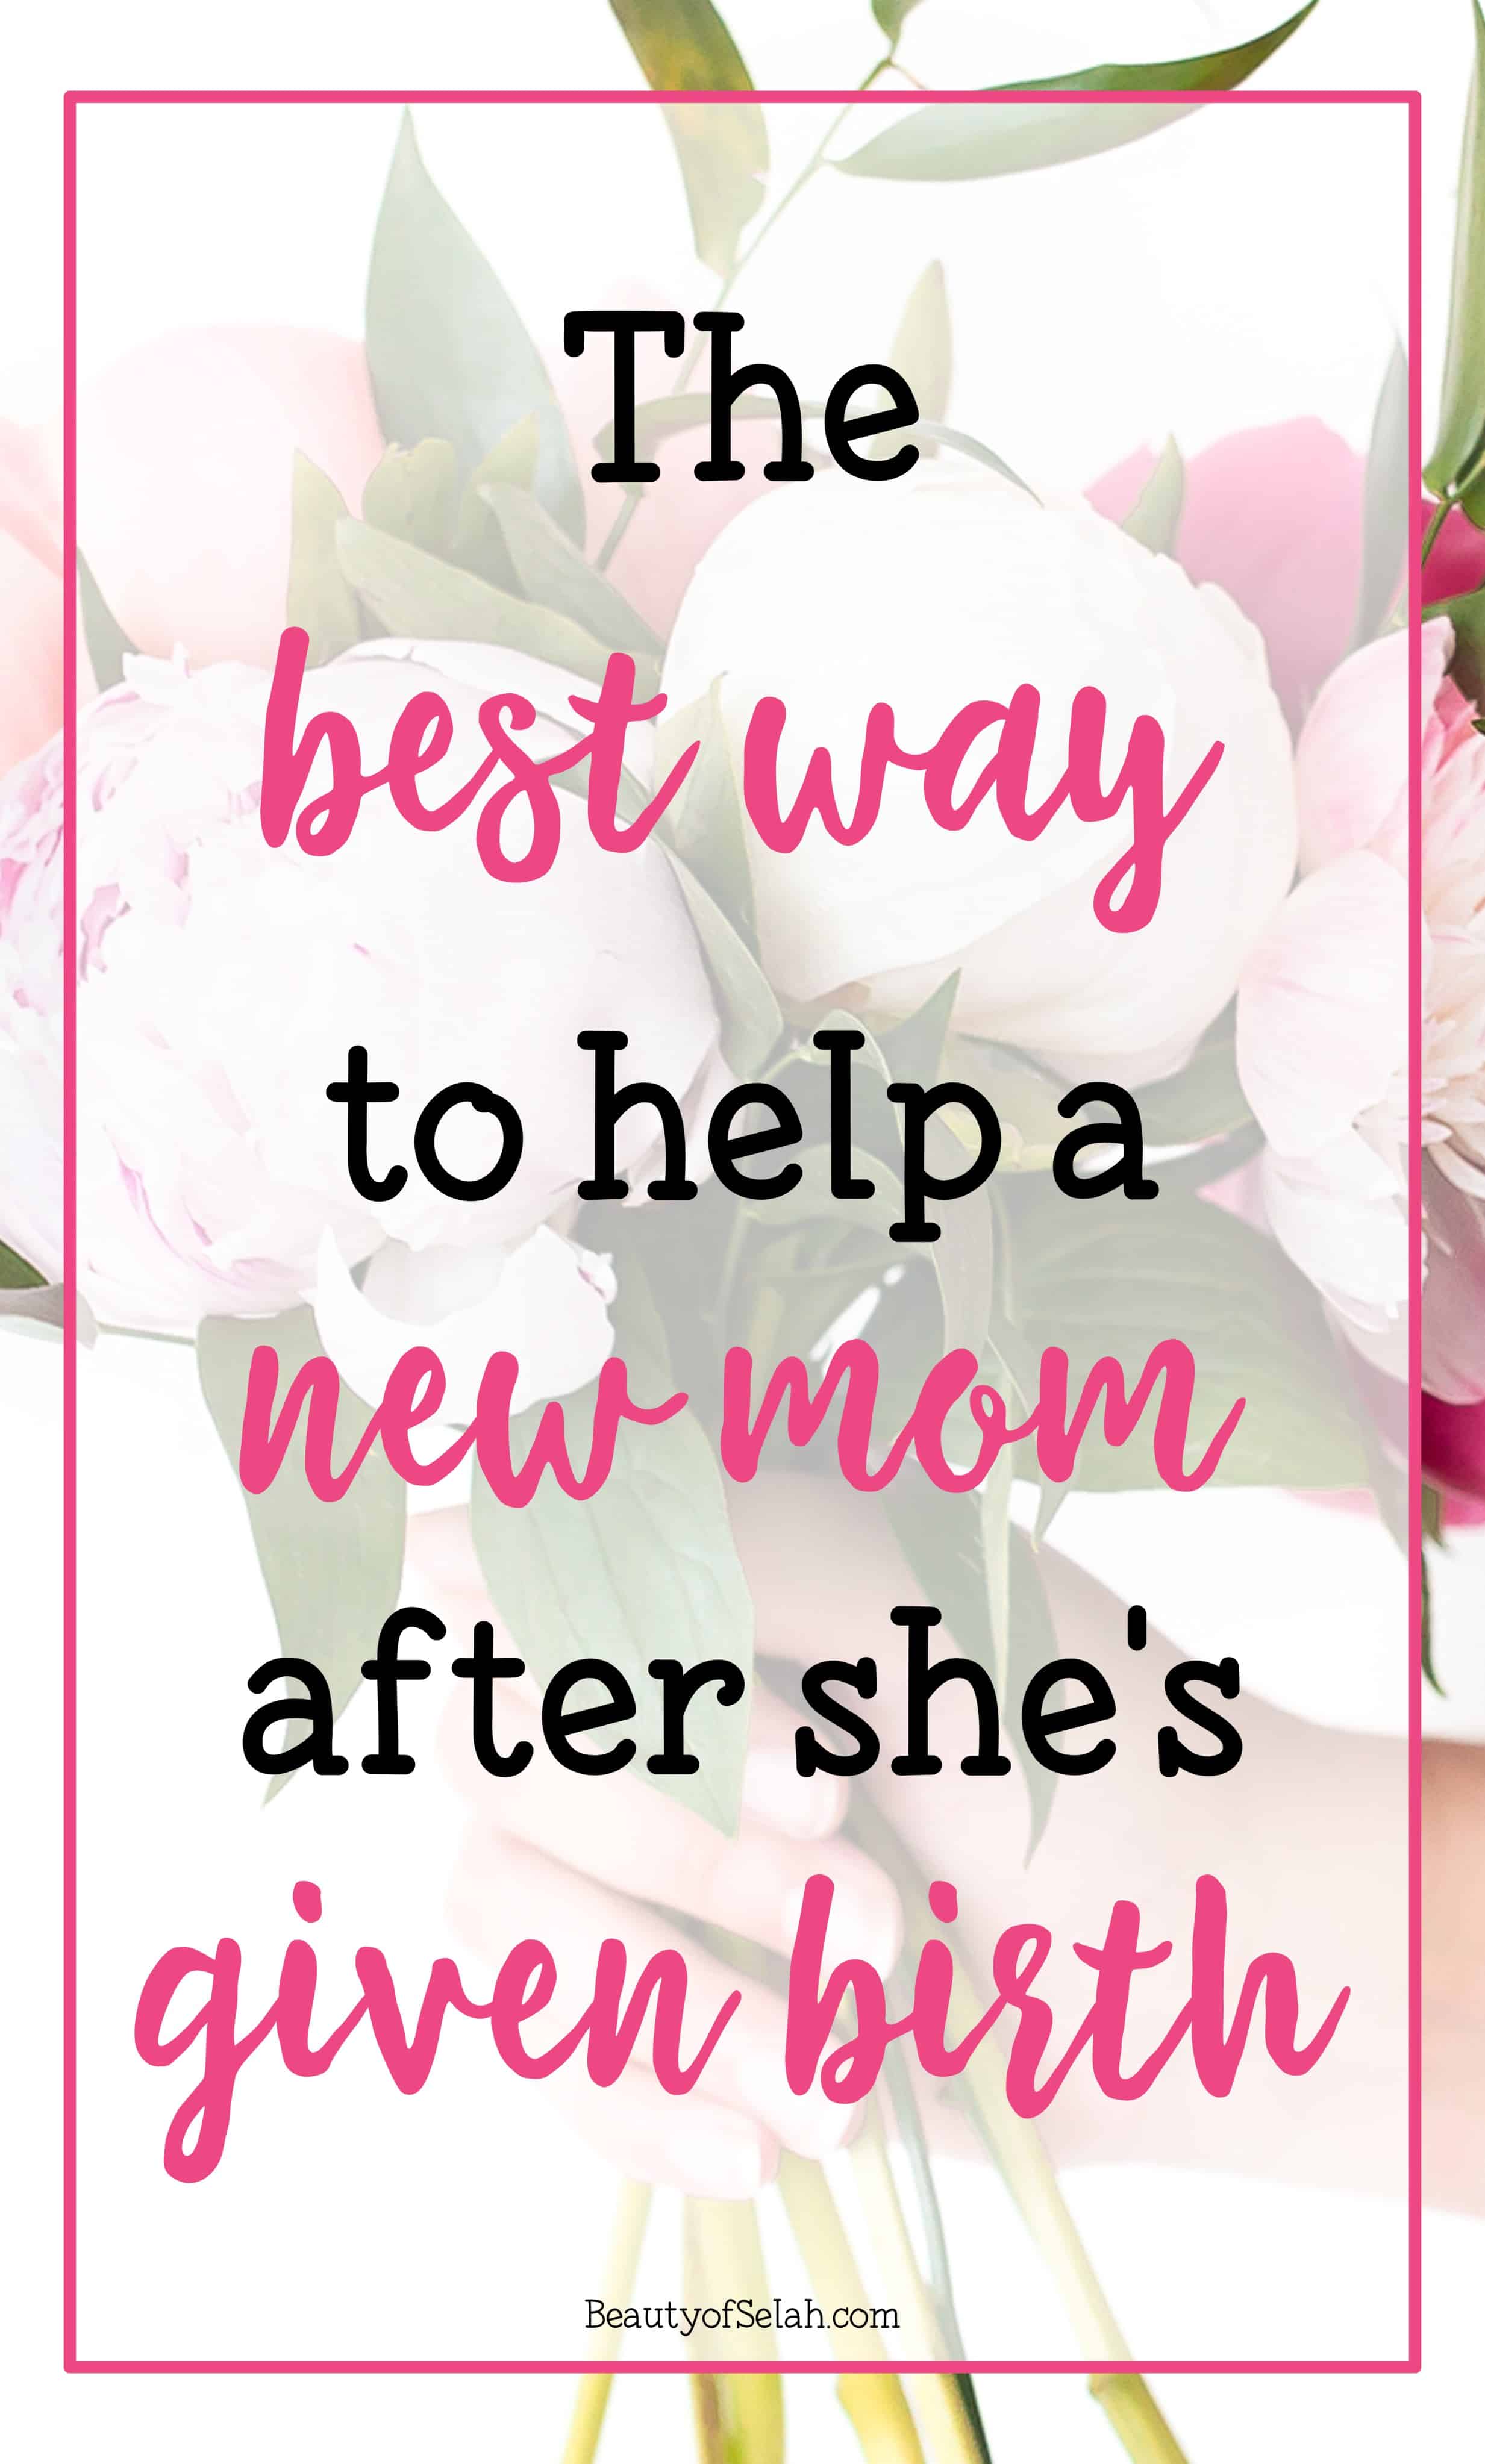 The Best Way to Help a New Mom after she's Given Birth